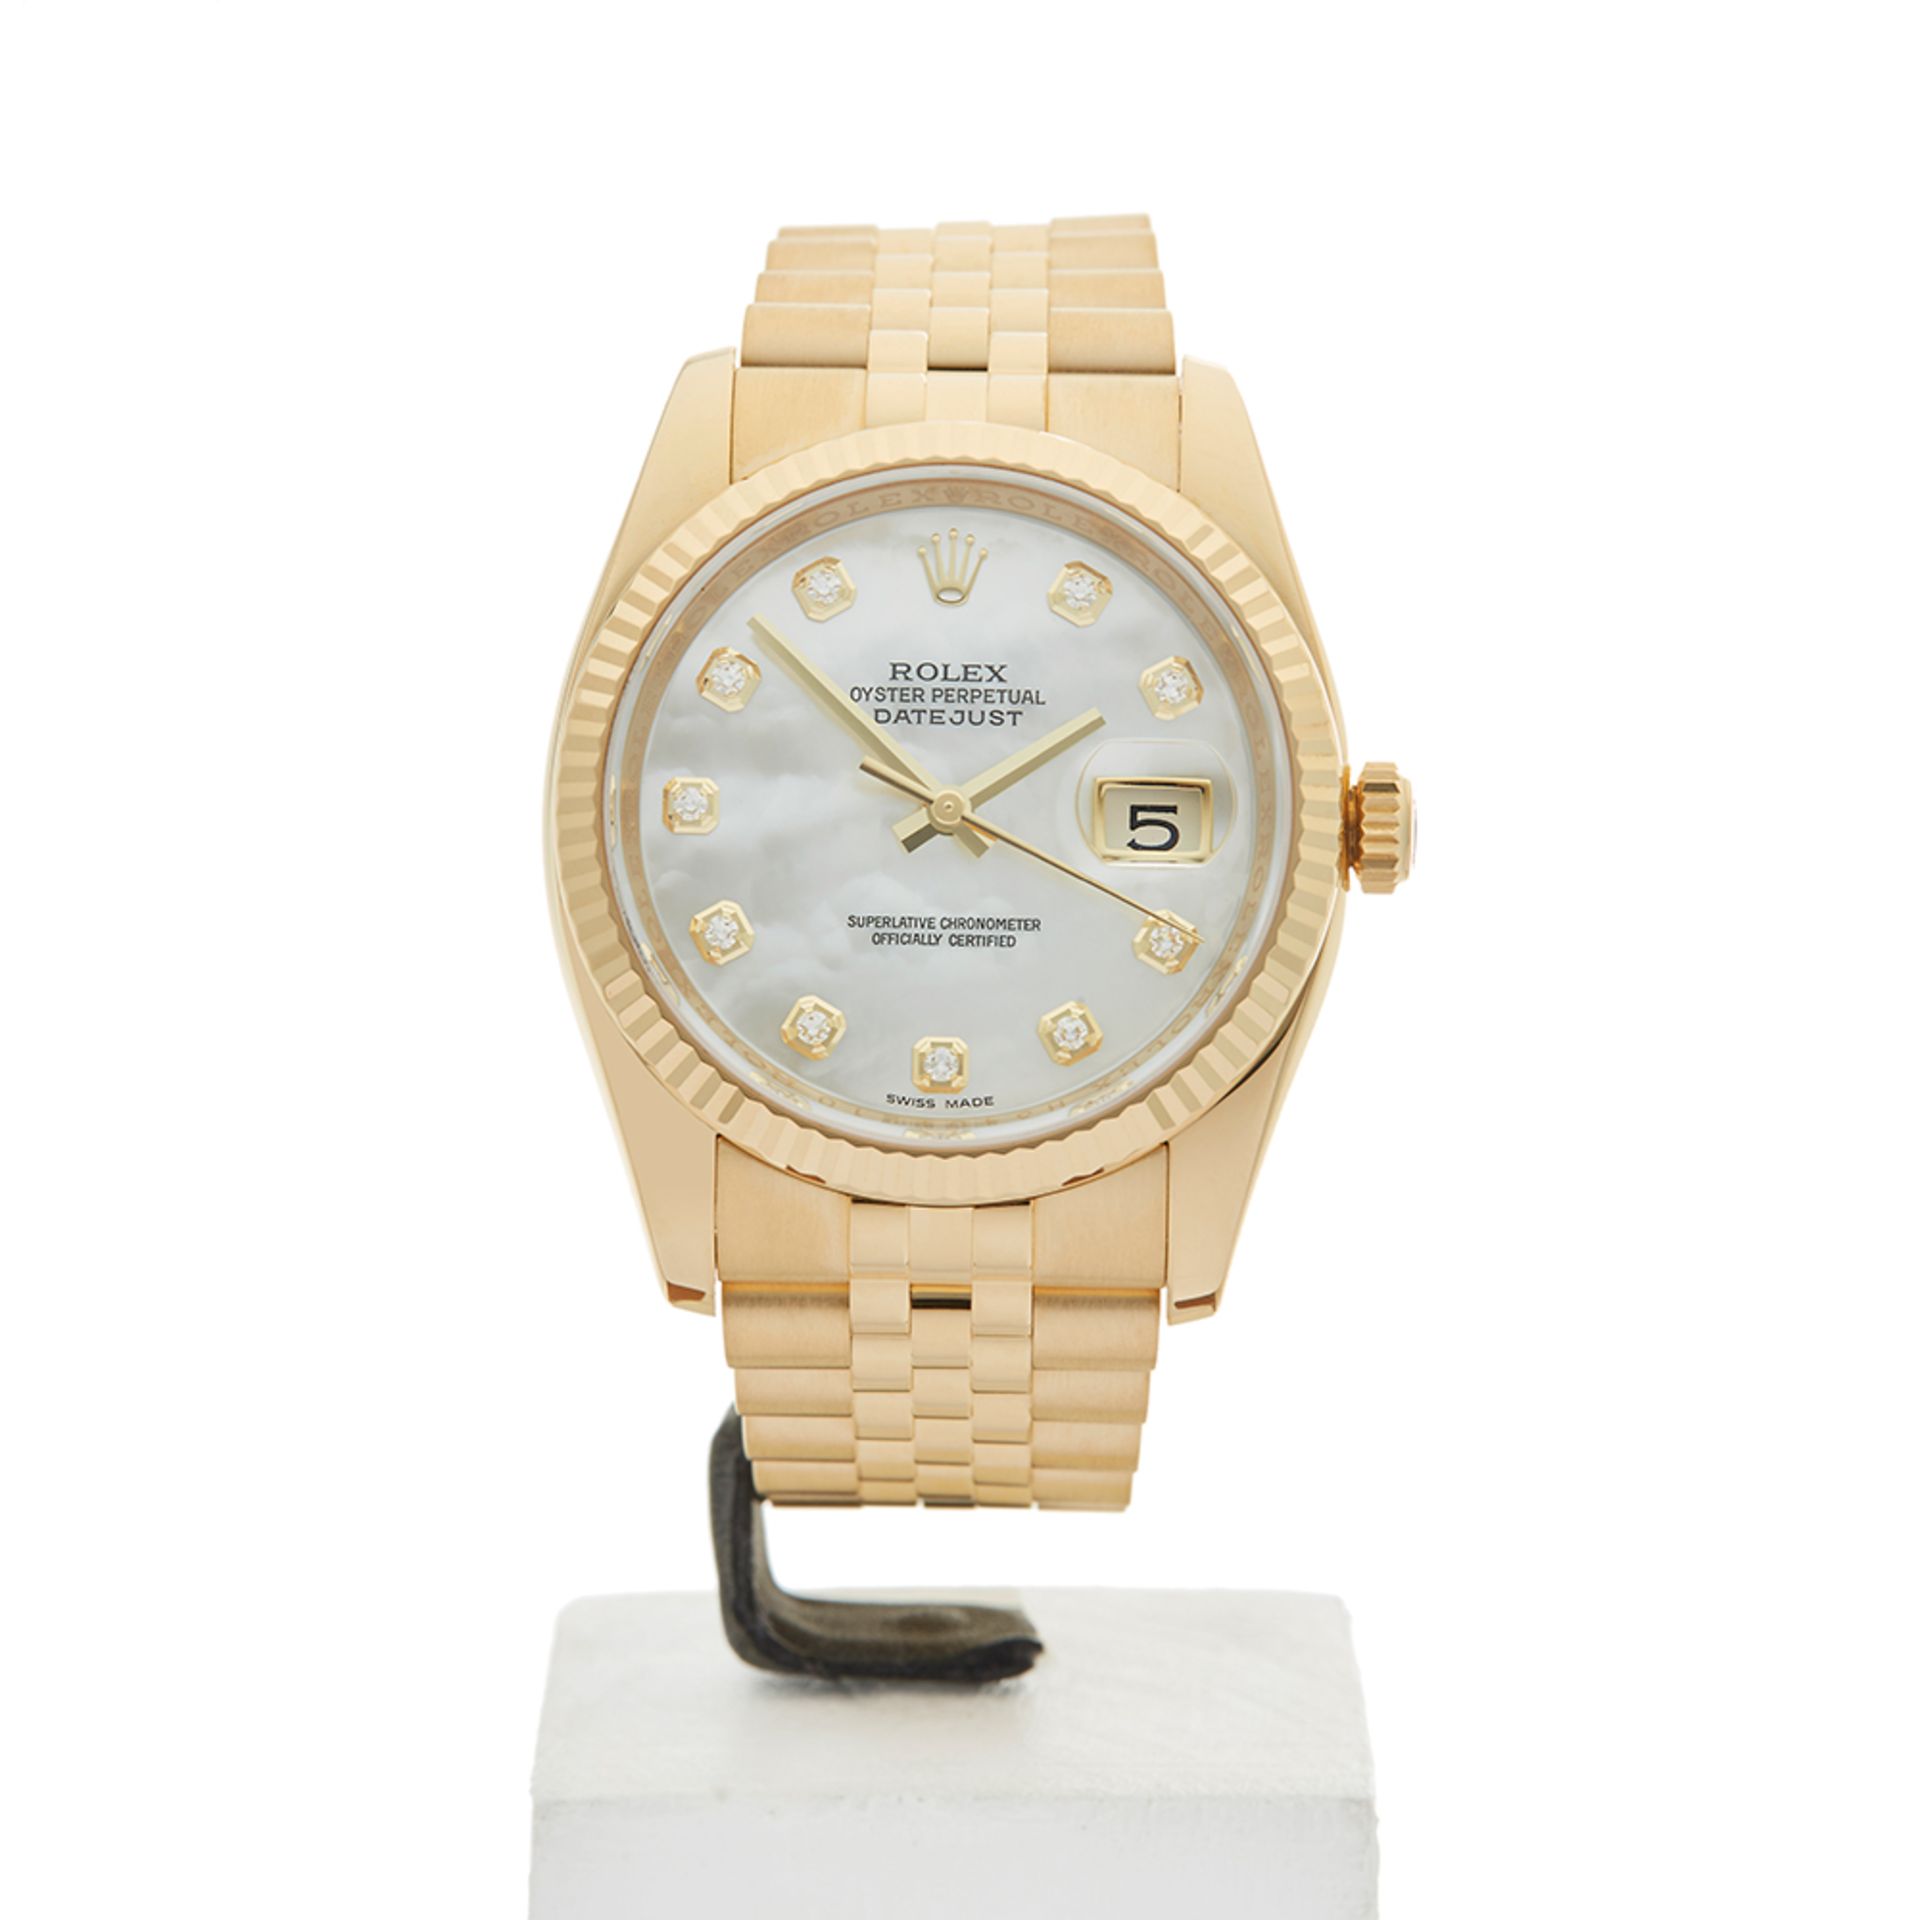 Rolex Datejust 36mm 18k Yellow Gold - 116238 - Image 2 of 9